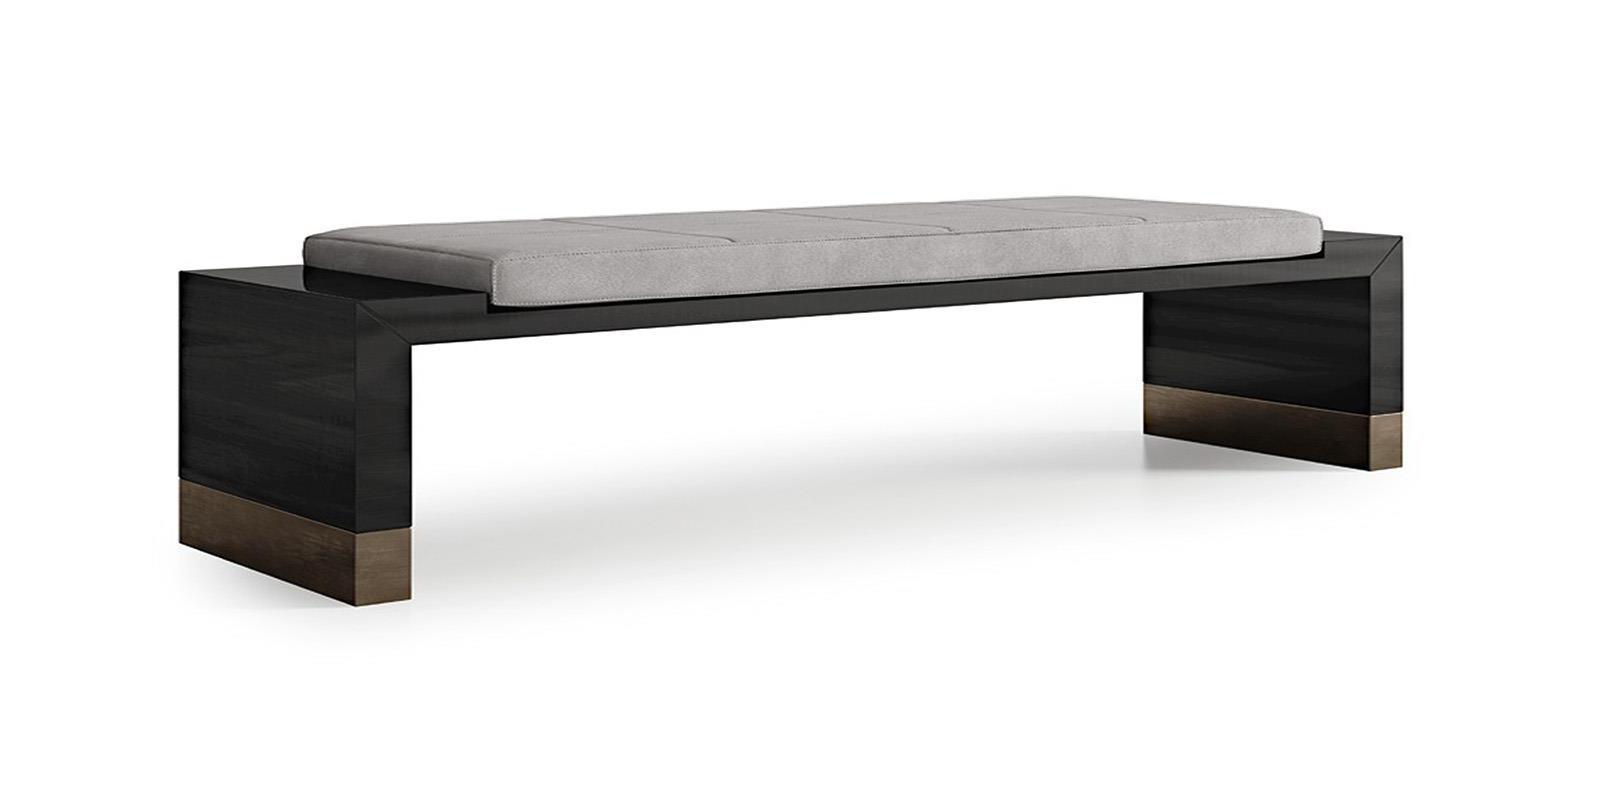 Bench with Wooden Base and Bronze Accents